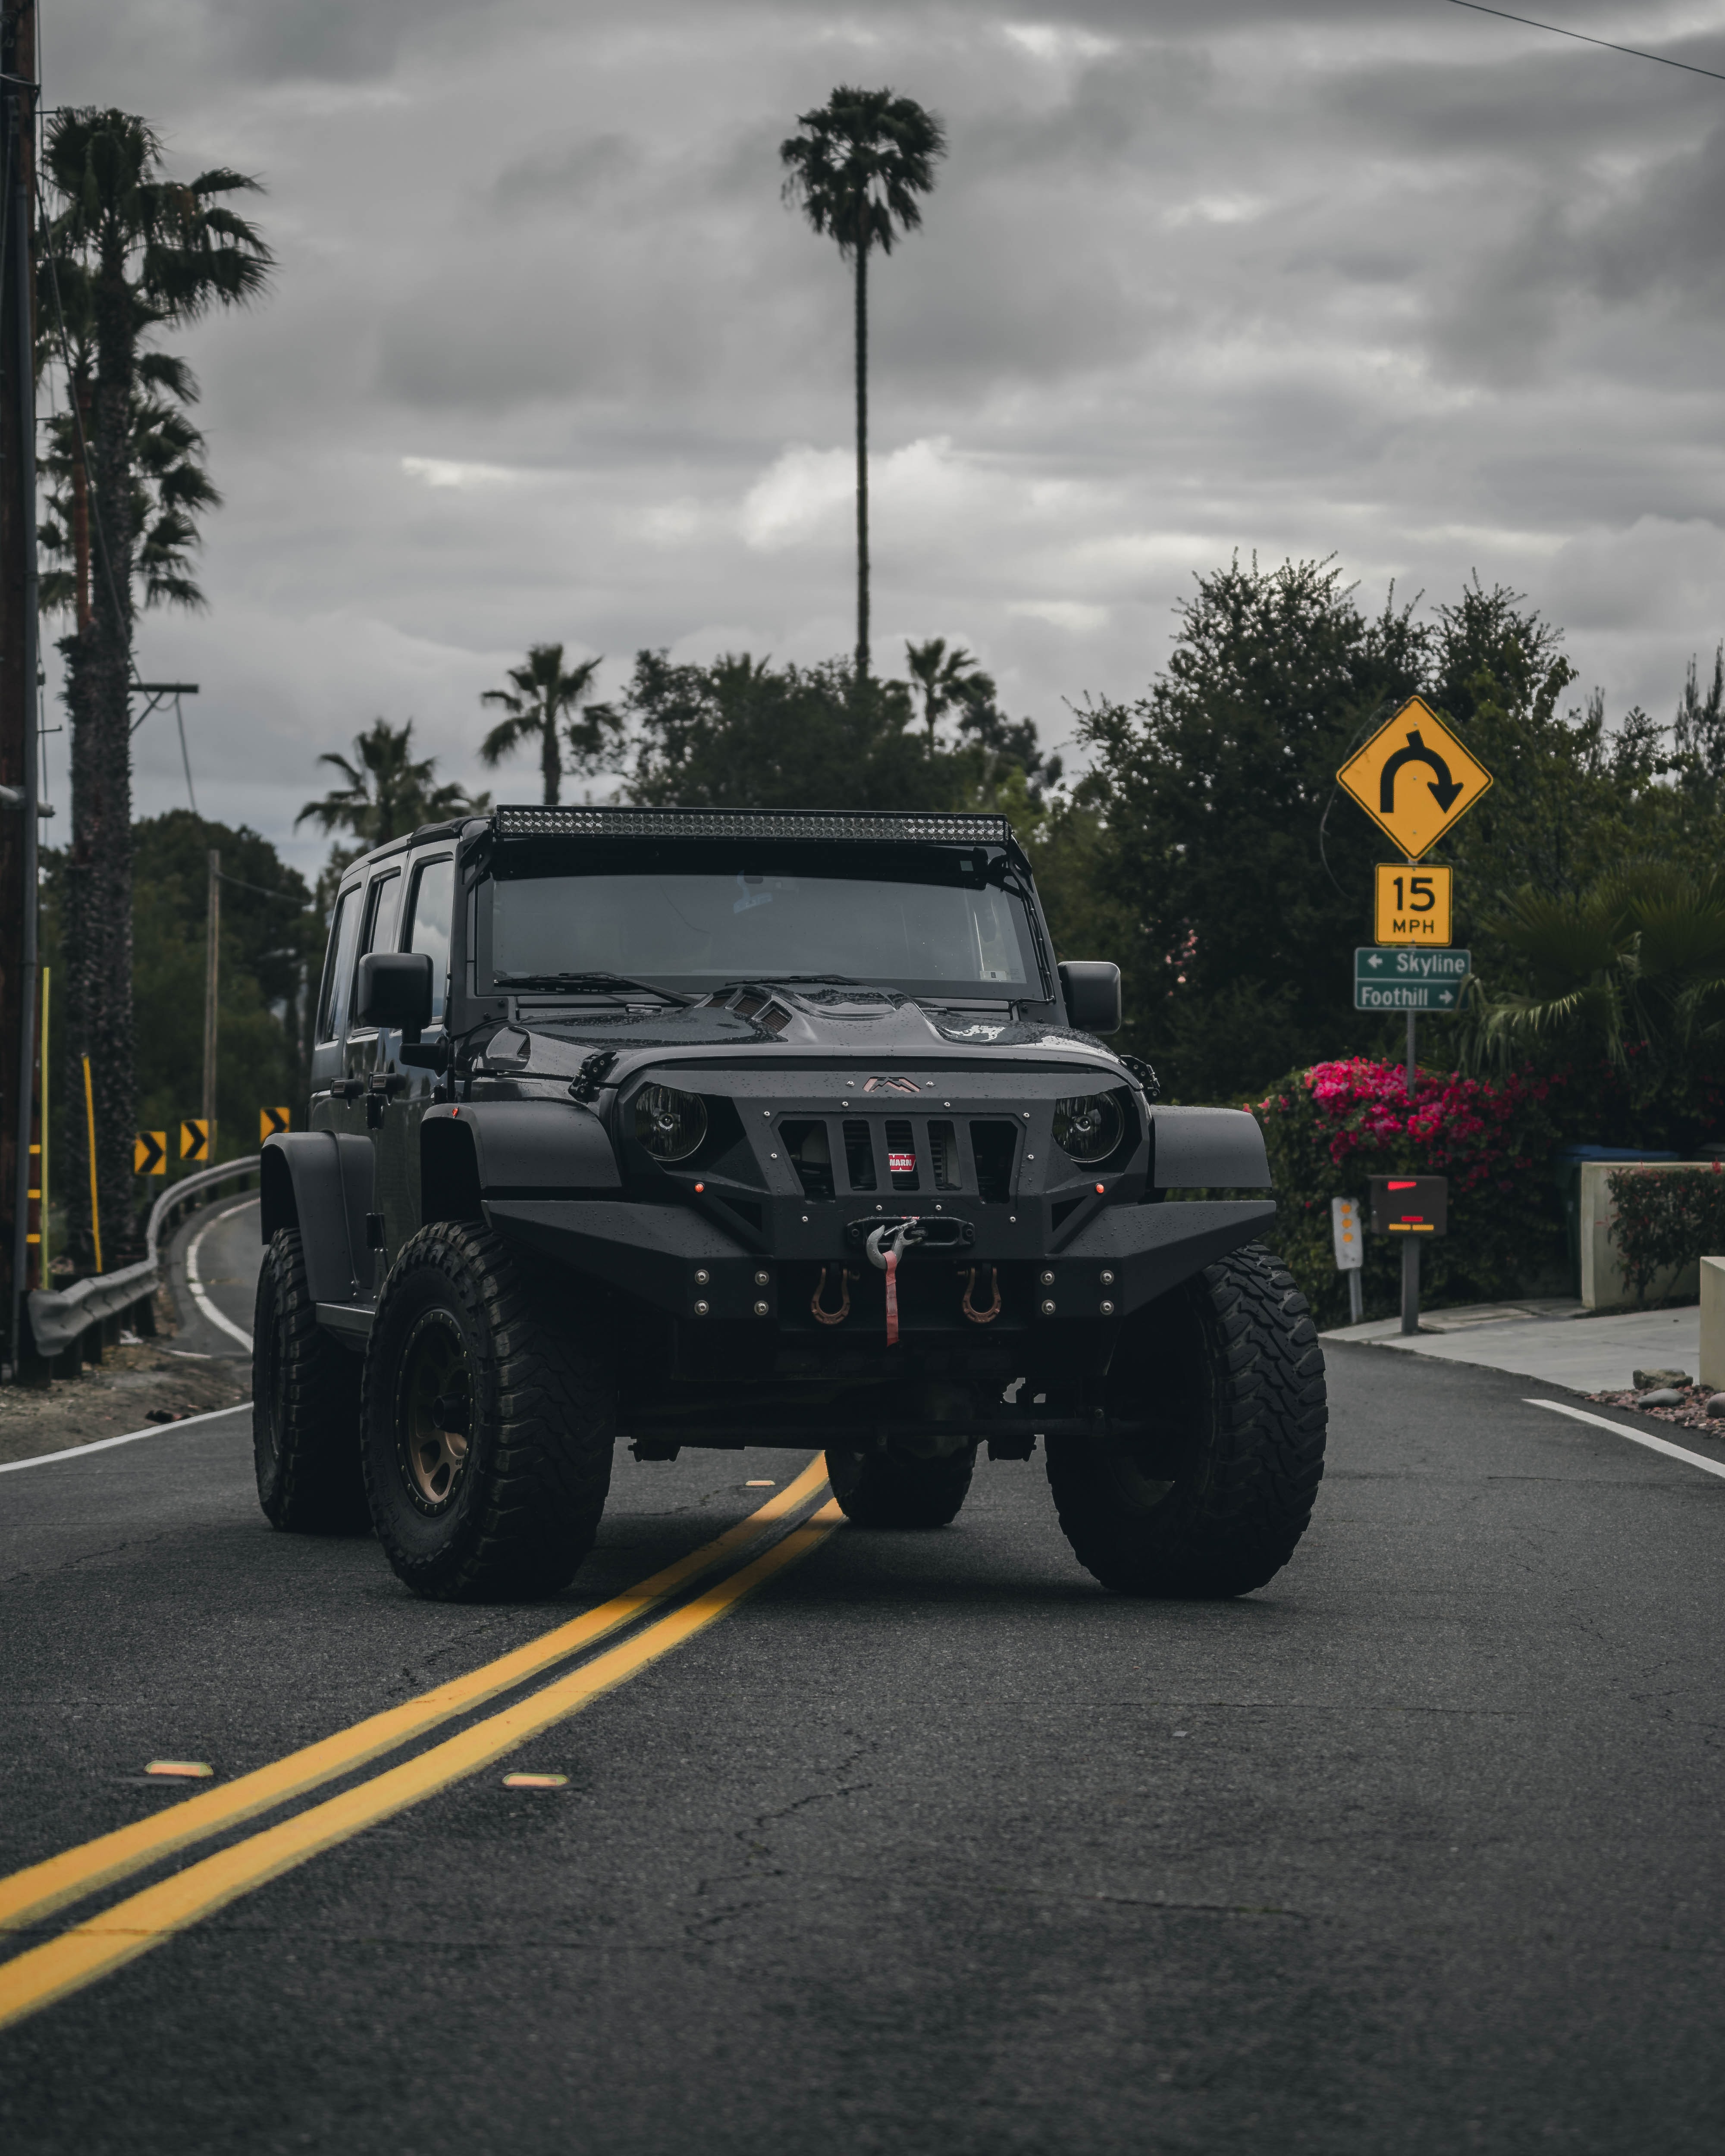 wallpapers car, jeep, cars, front view, jeep cj